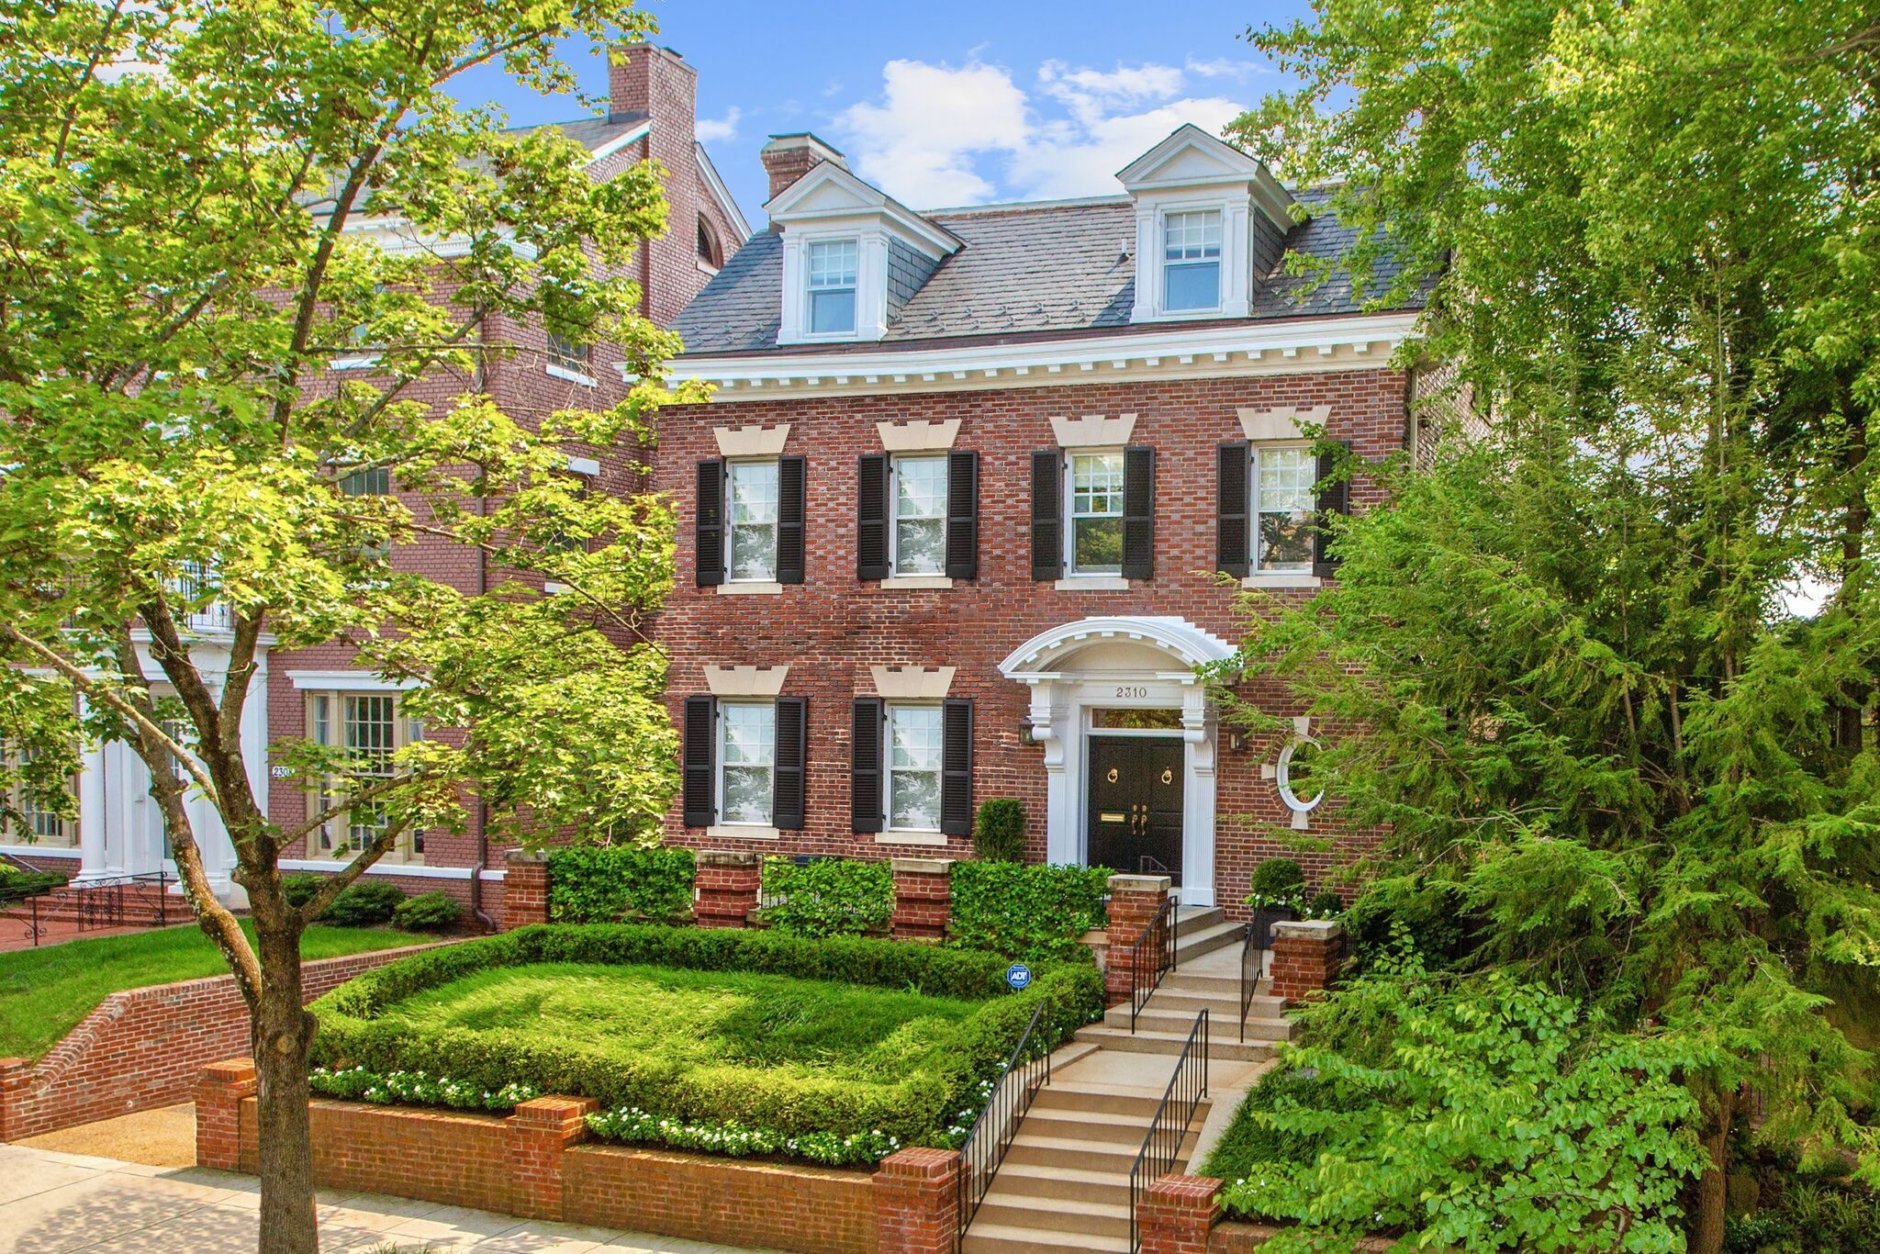 This renovated home in Kalorama is on the market for $5,295,000 and comes with high-profile neighbors and a ritzy interior design. (Courtesy of Home Visit)